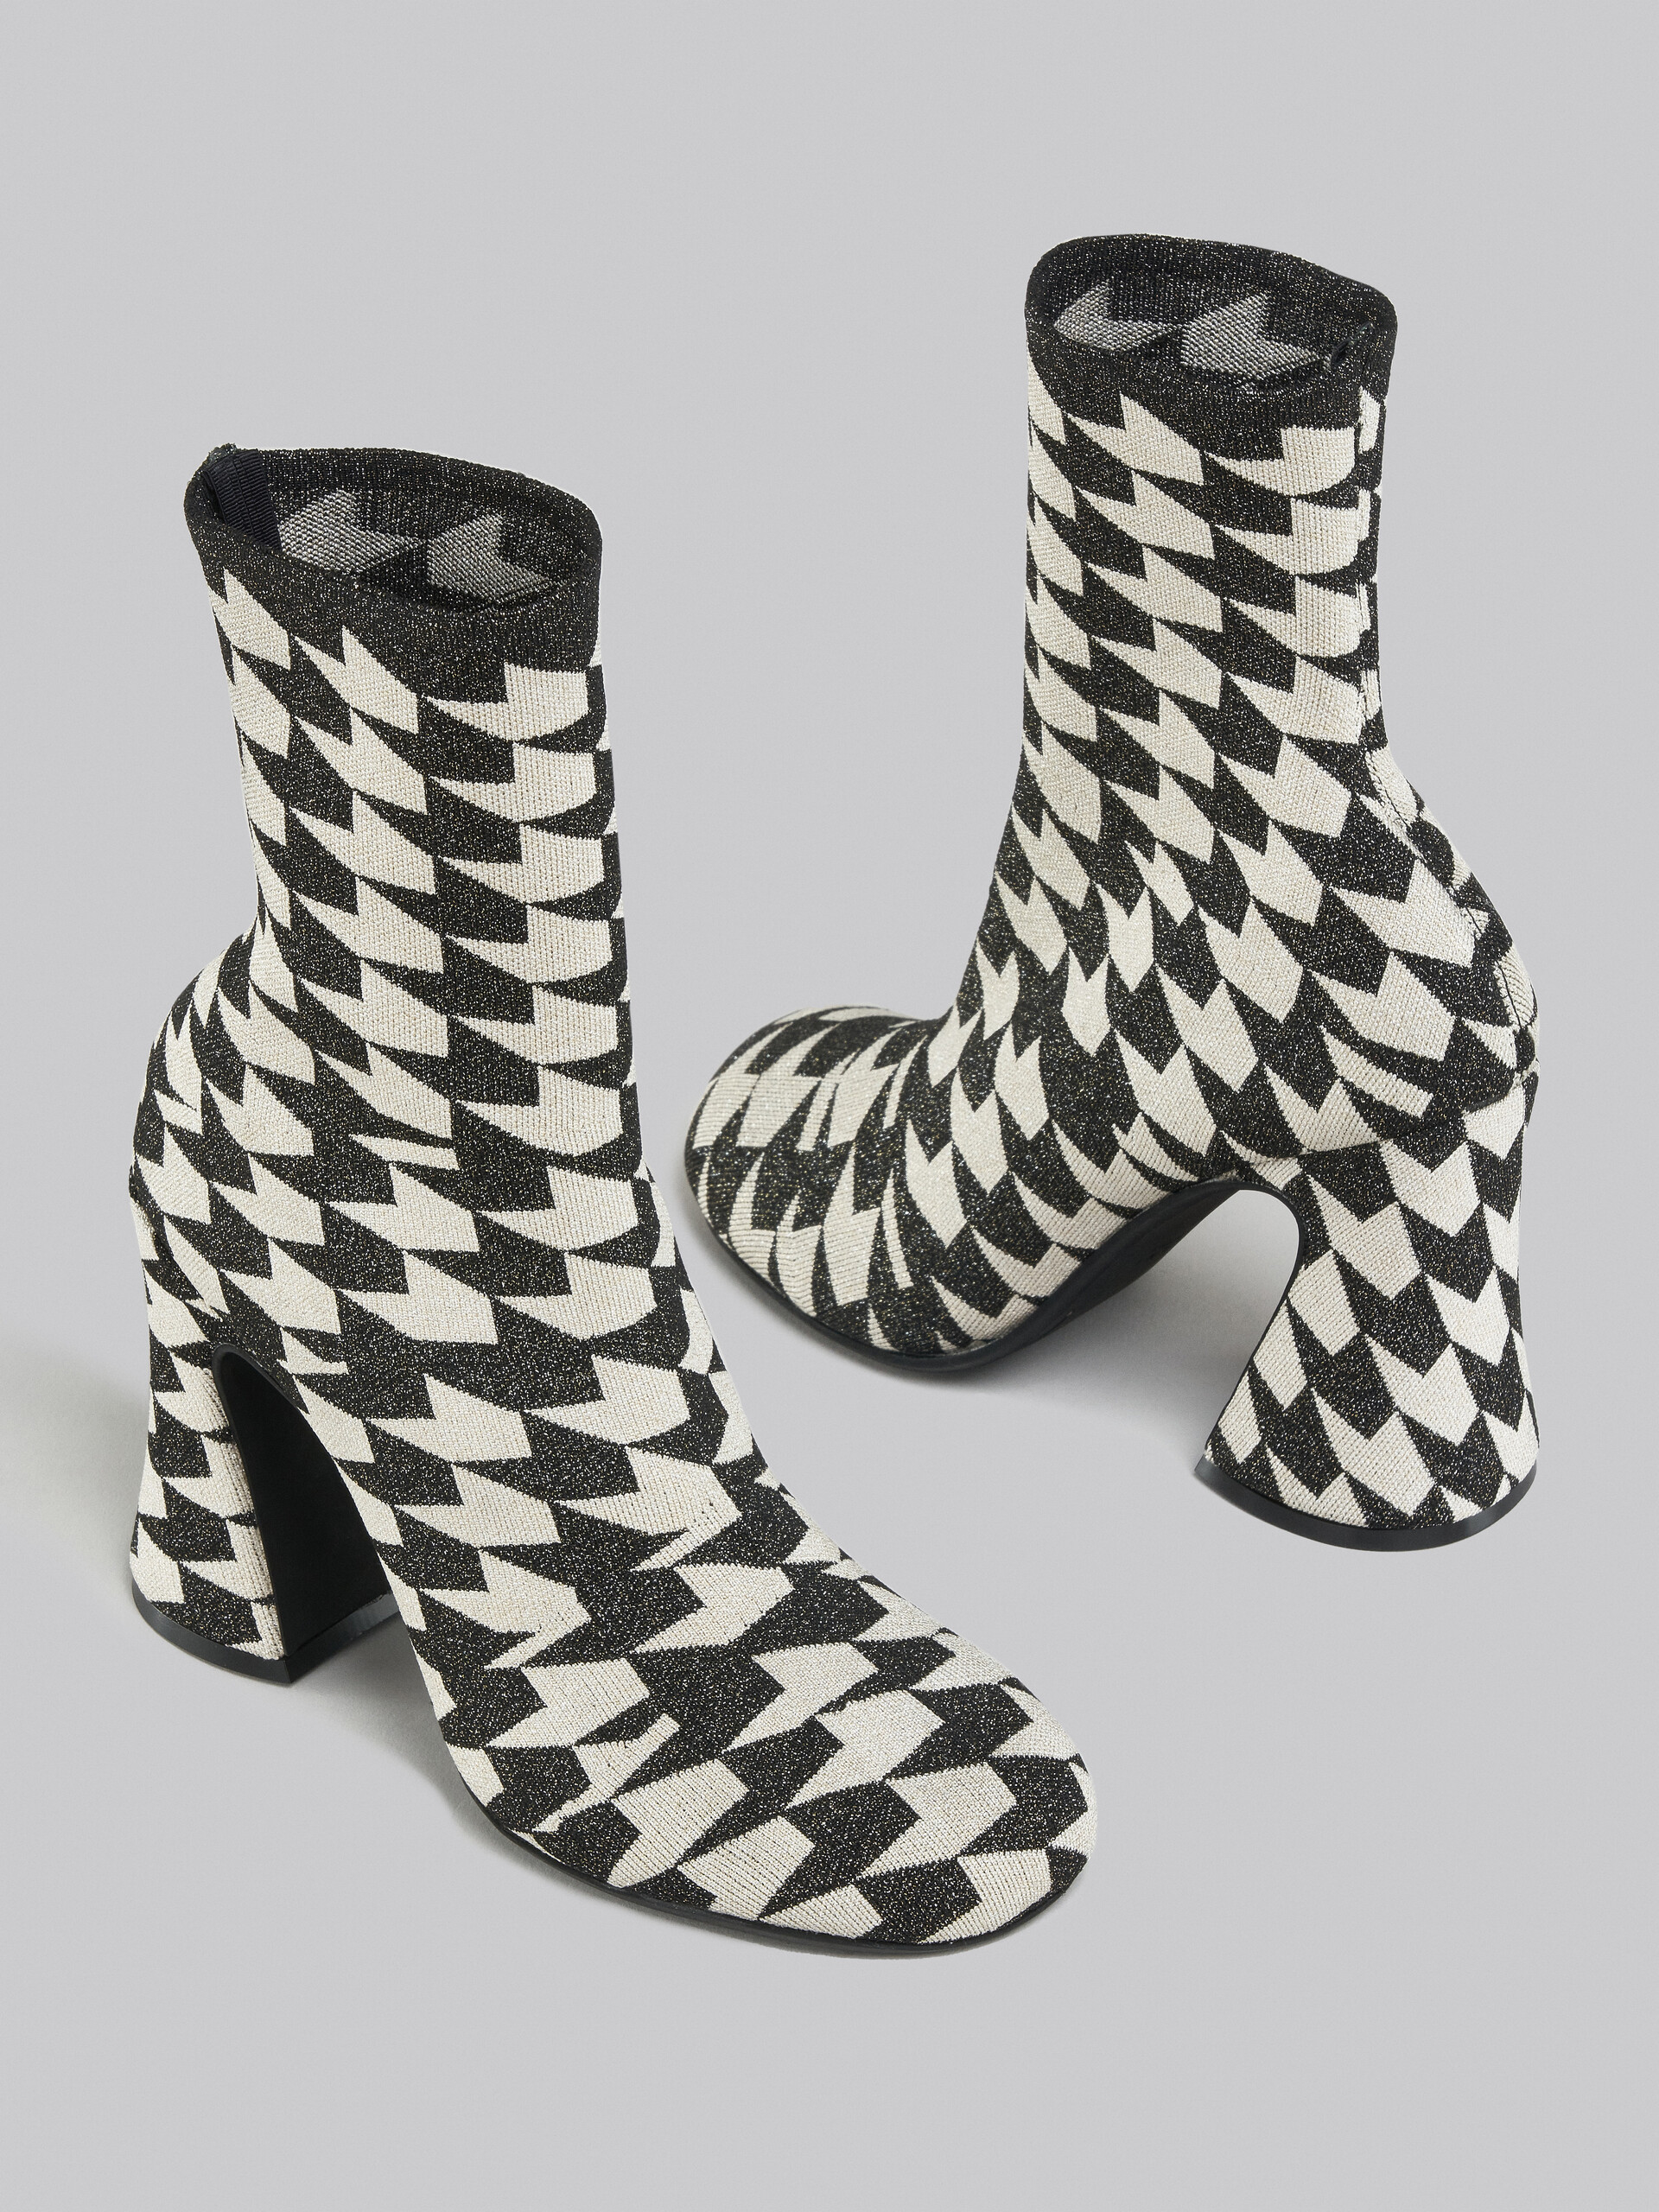 Black and white jacquard lurex ankle boot - Boots - Image 4